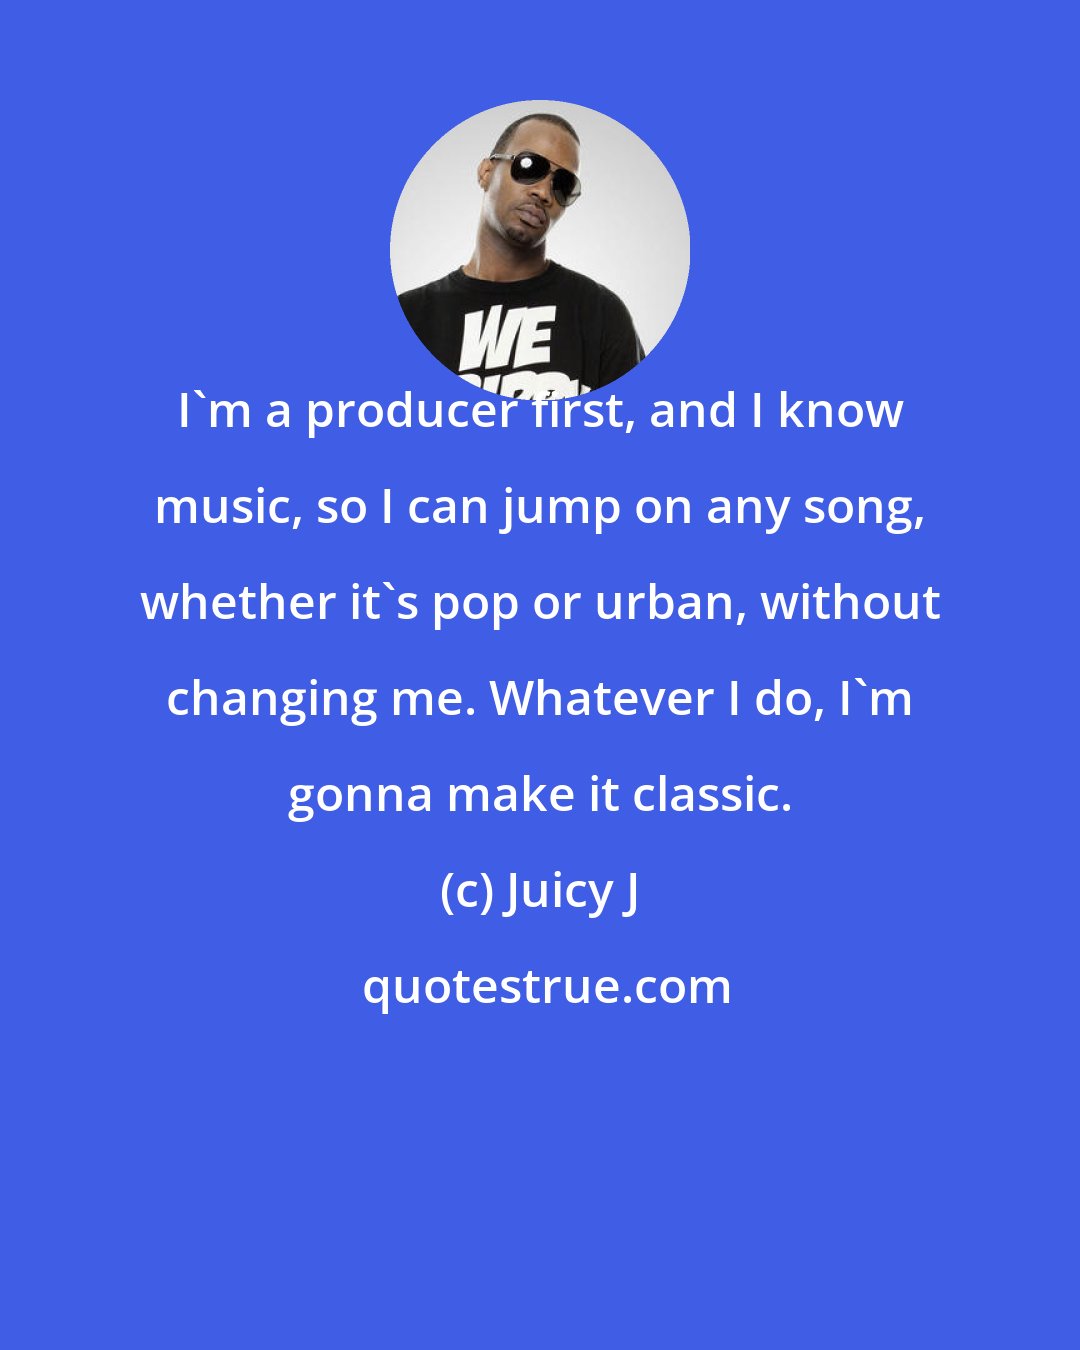 Juicy J: I'm a producer first, and I know music, so I can jump on any song, whether it's pop or urban, without changing me. Whatever I do, I'm gonna make it classic.